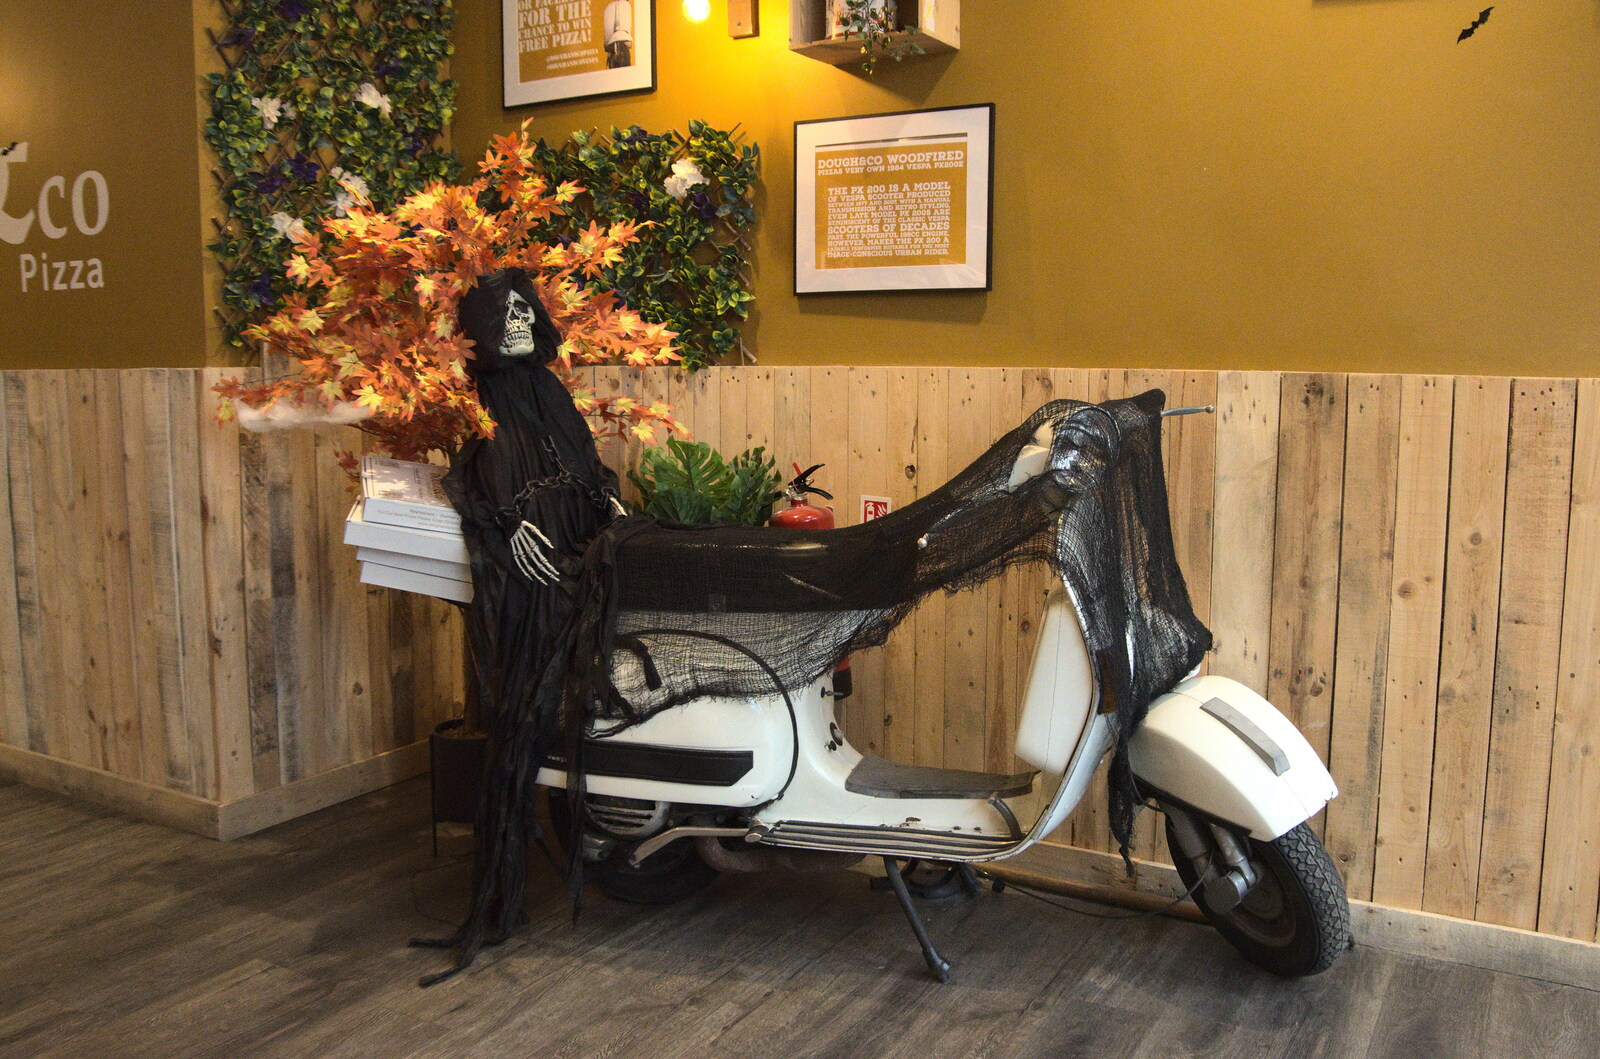 Pizza and Pasta in Bury St. Edmunds, Suffolk - 30th October 2022: The pizza place has a skeleton on a Vespa